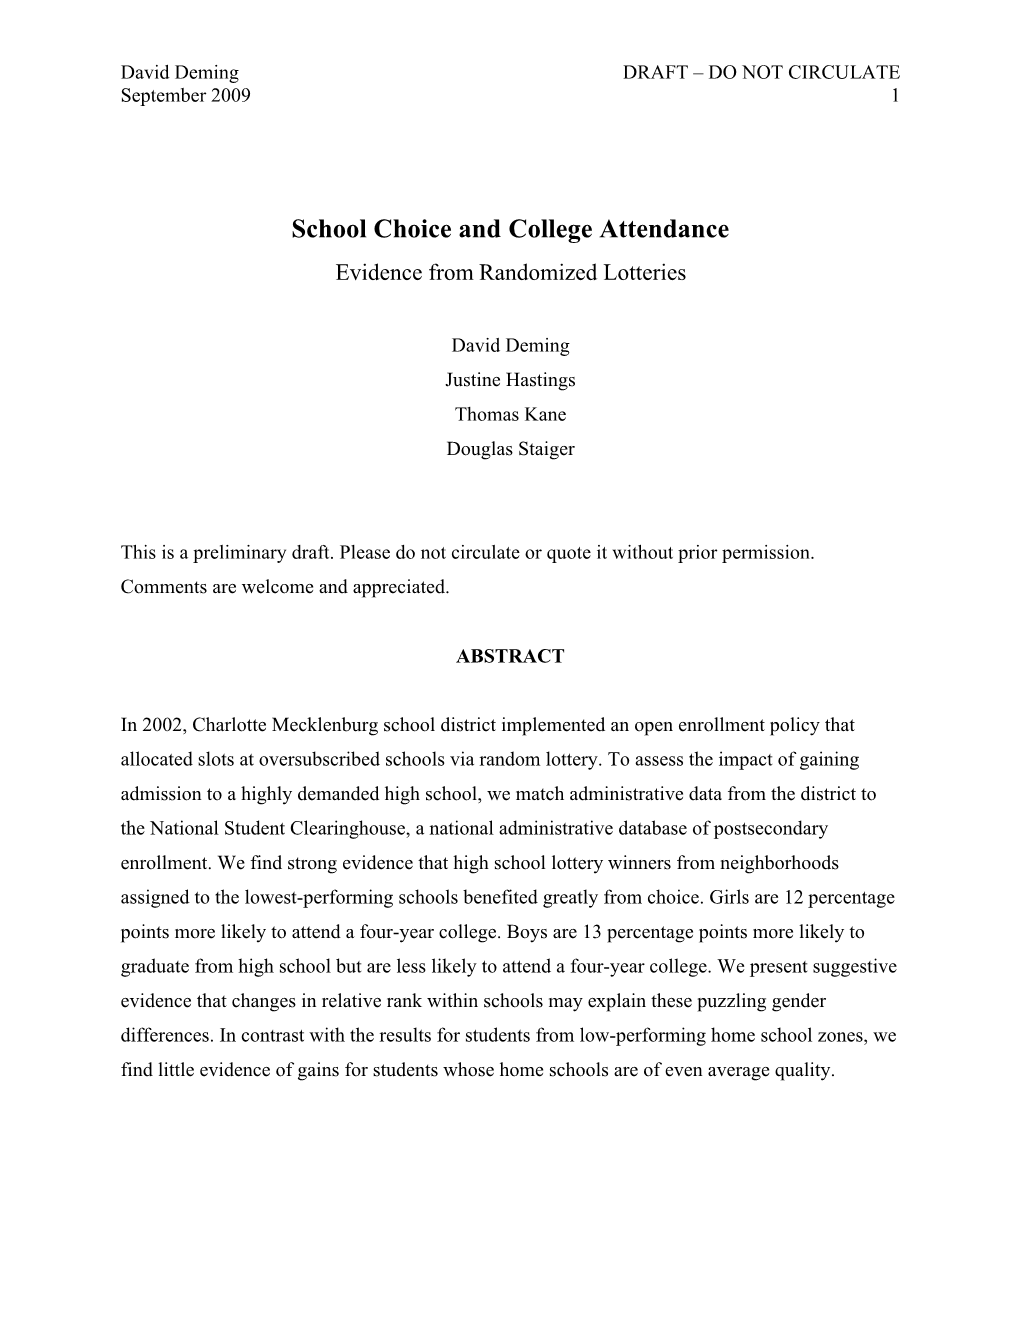 School Choice and College Attendance Evidence from Randomized Lotteries